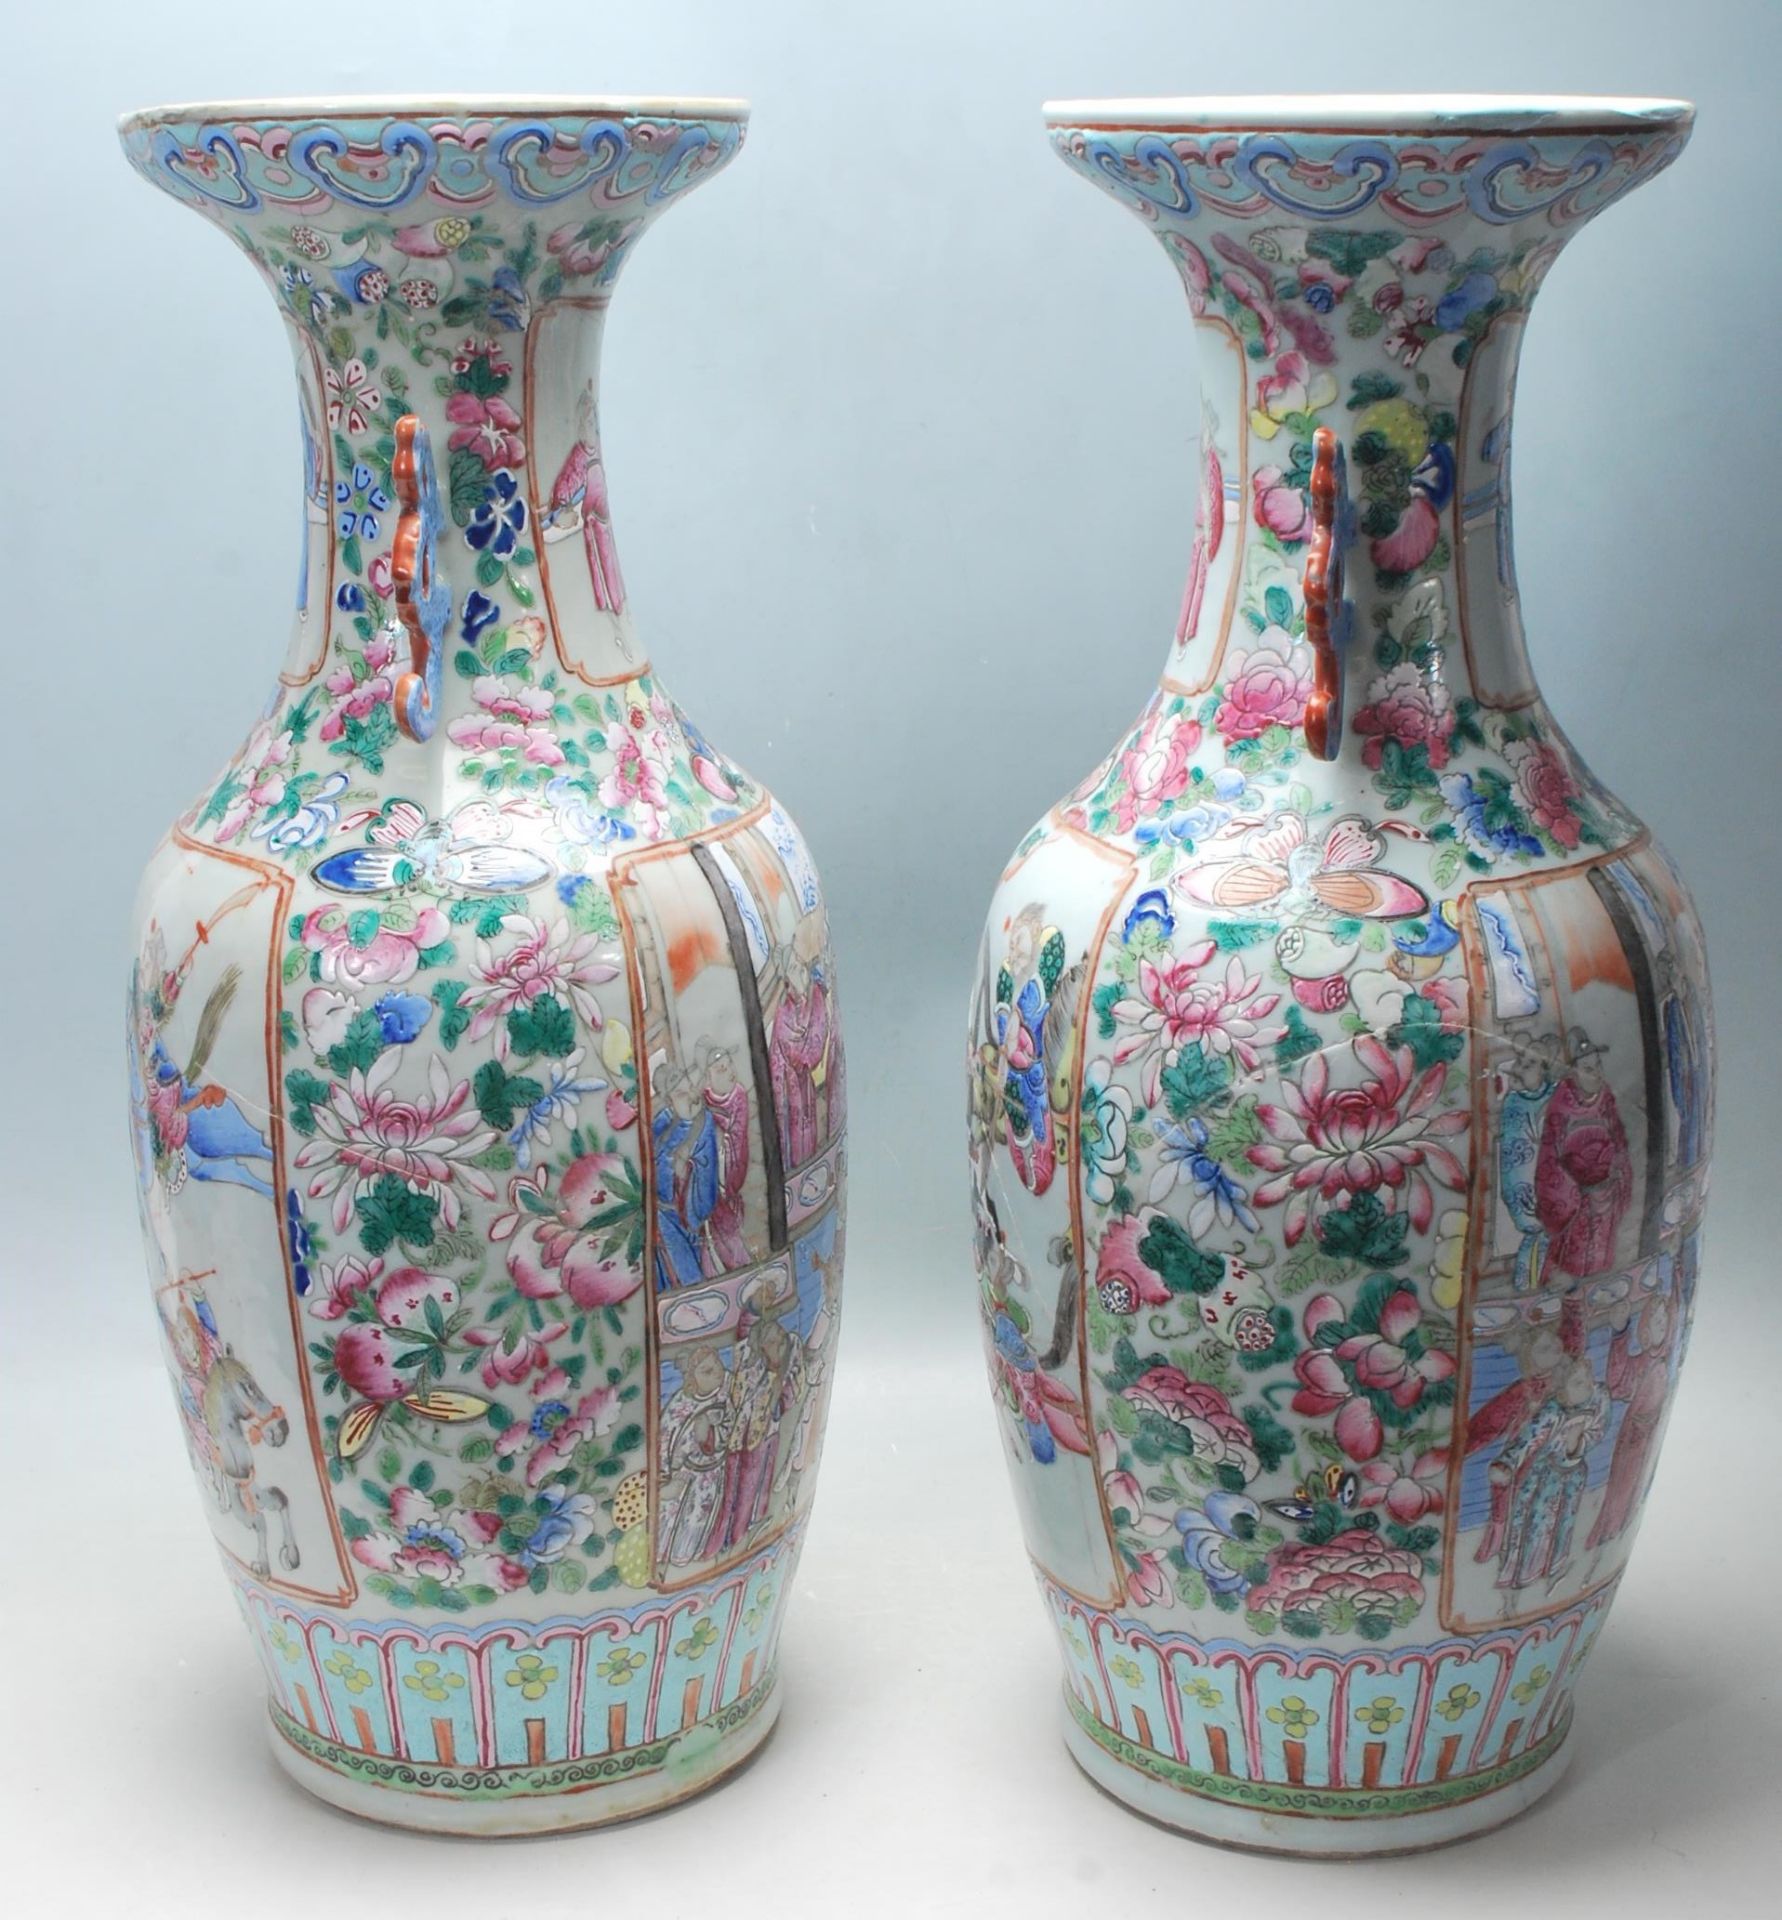 PAIR OF CHINESE ORIENTAL FAMILLE ROSE VASES - Image 2 of 9